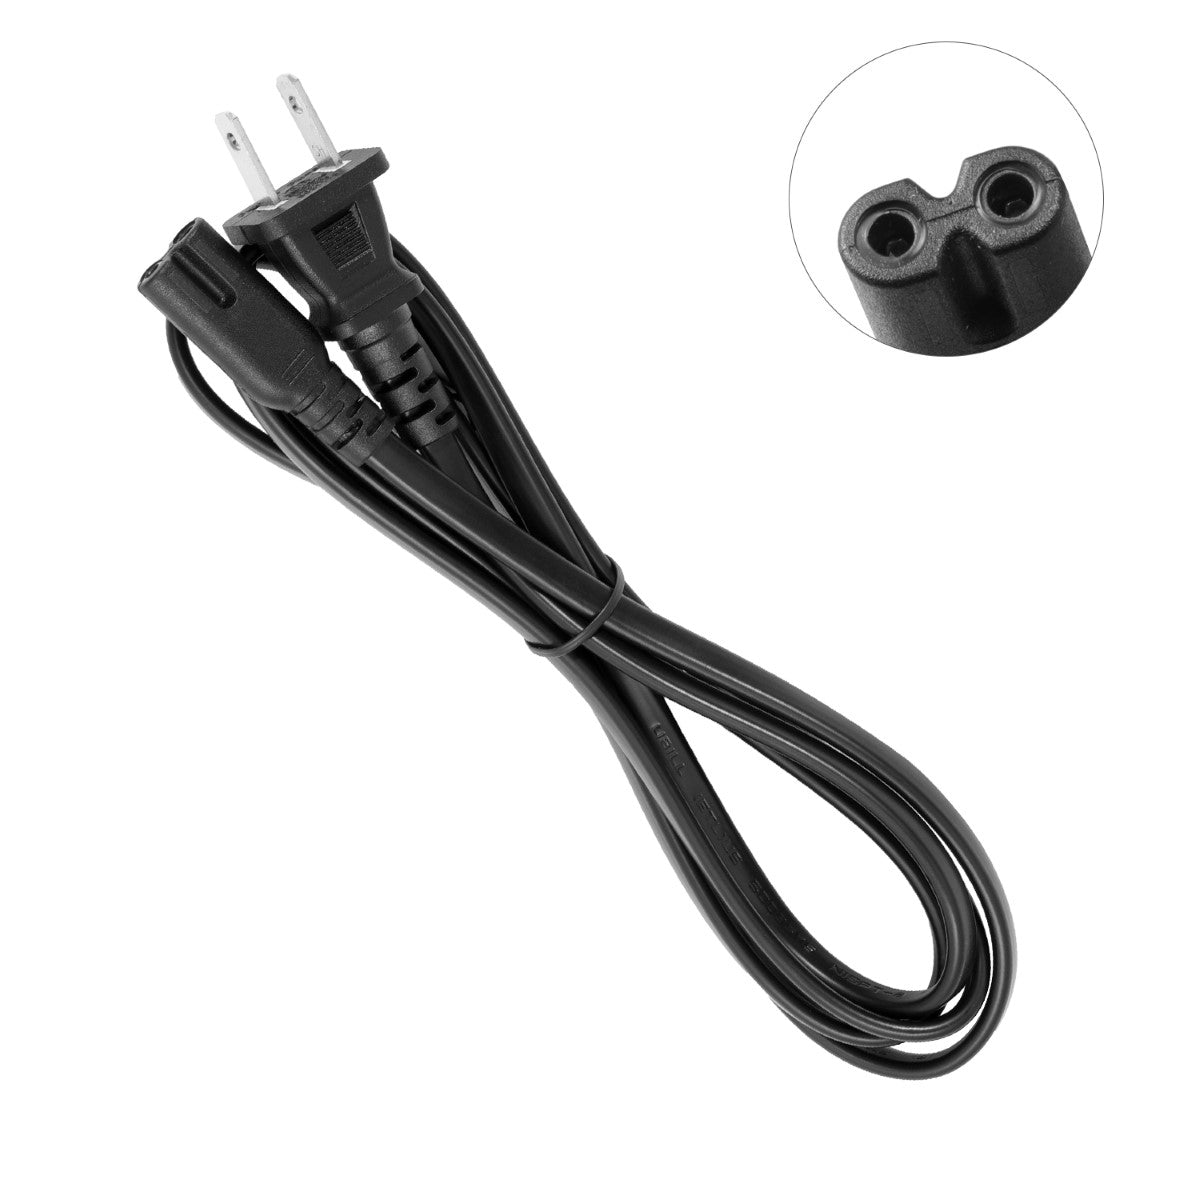 Power Cable for HP DeskJet 2755/2755e All-in-One Printer.